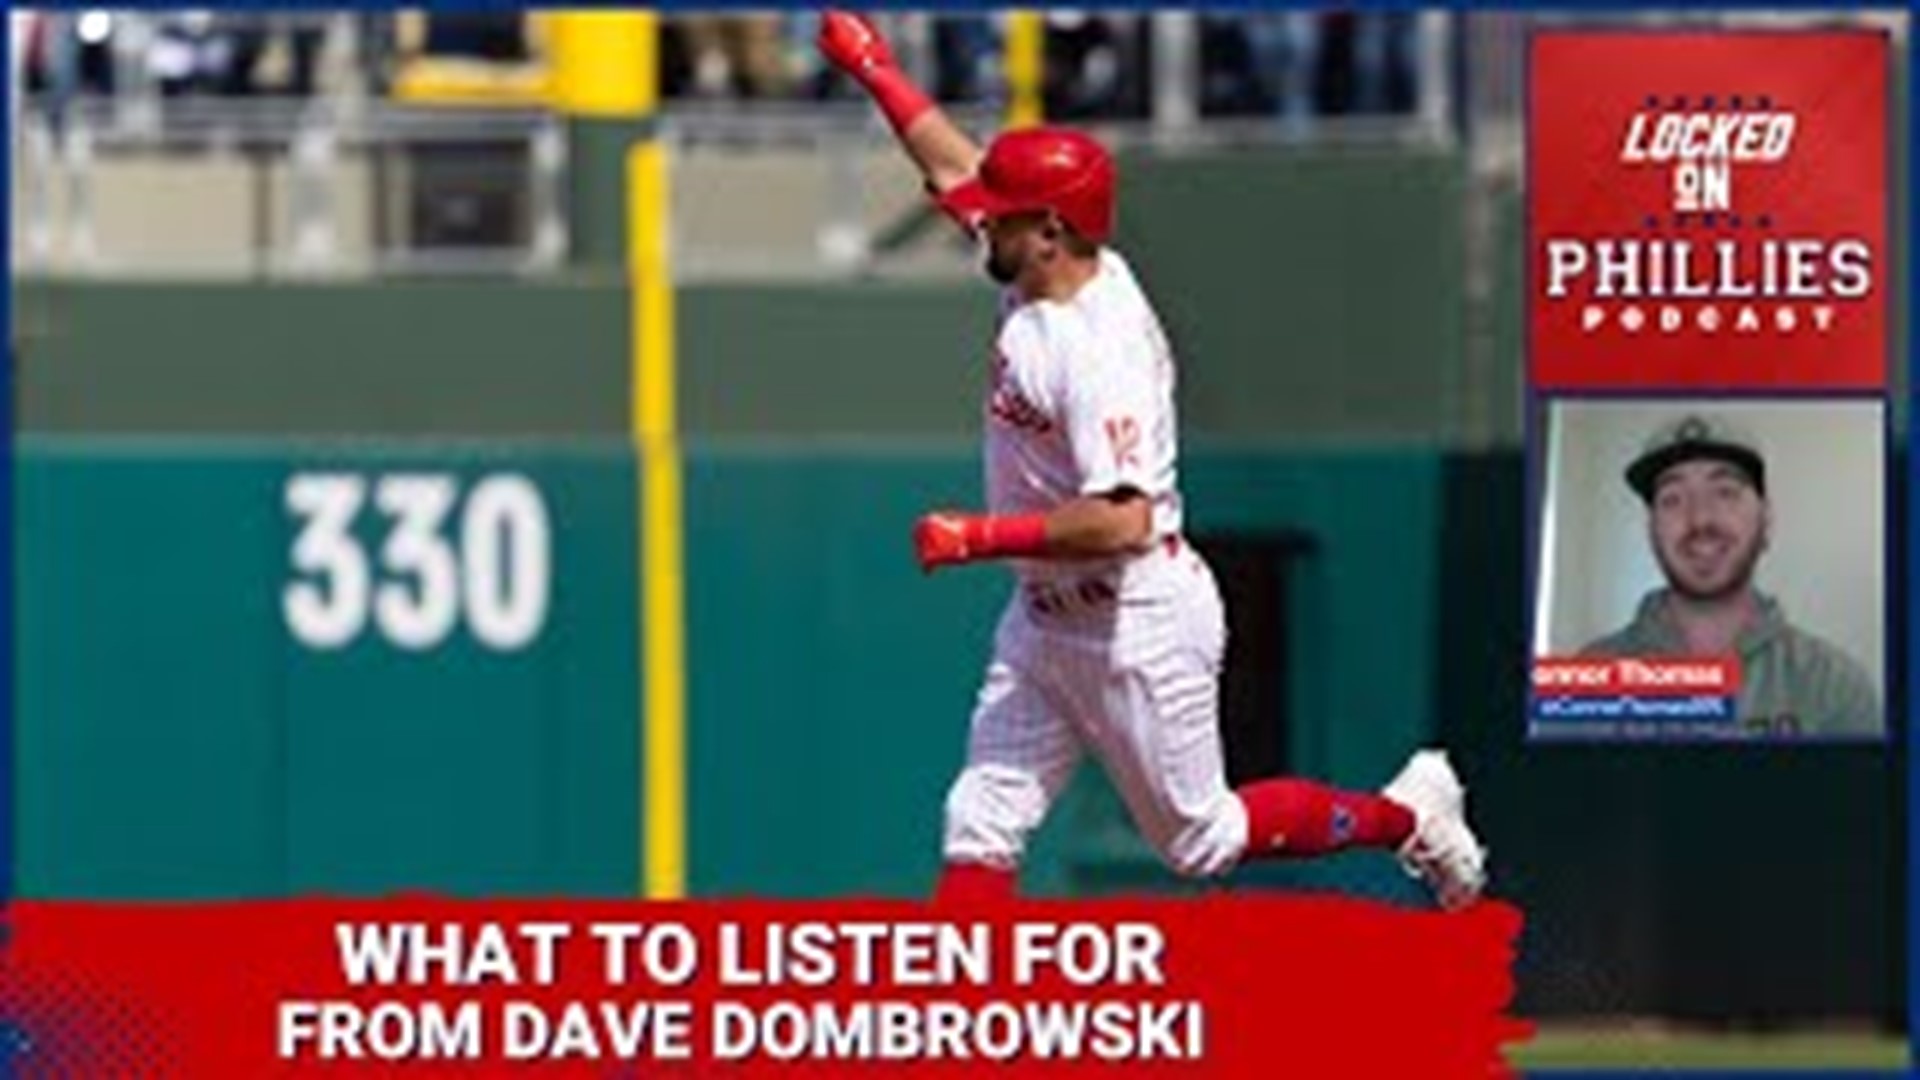 What Plans Does Dave Dombrowski Have For The Philadelphia Phillies Offseason? Locked On Phillies fox43